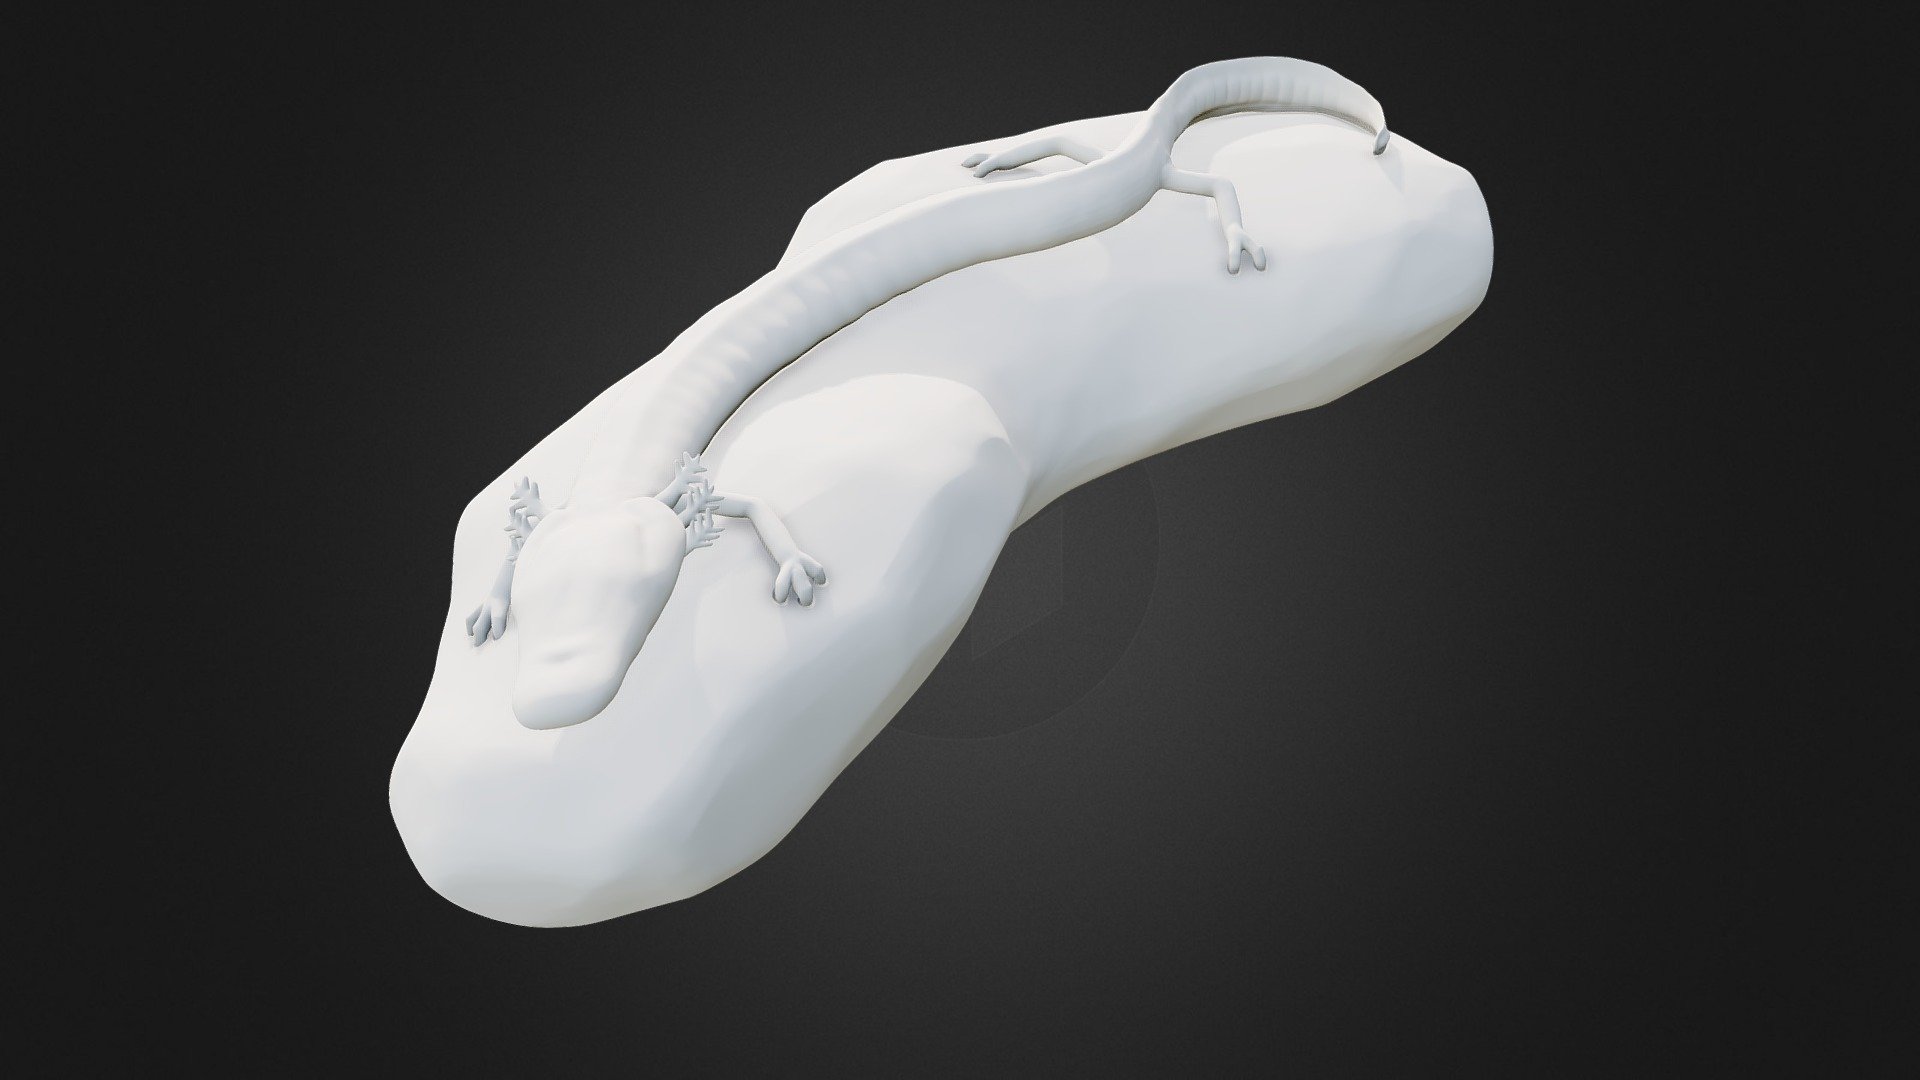 This is an Olm I did for a client that needed a 3d print ready model. It was a fun challenge to take on, especially the optimization for 3 printing like tolerances and pinning 3d model